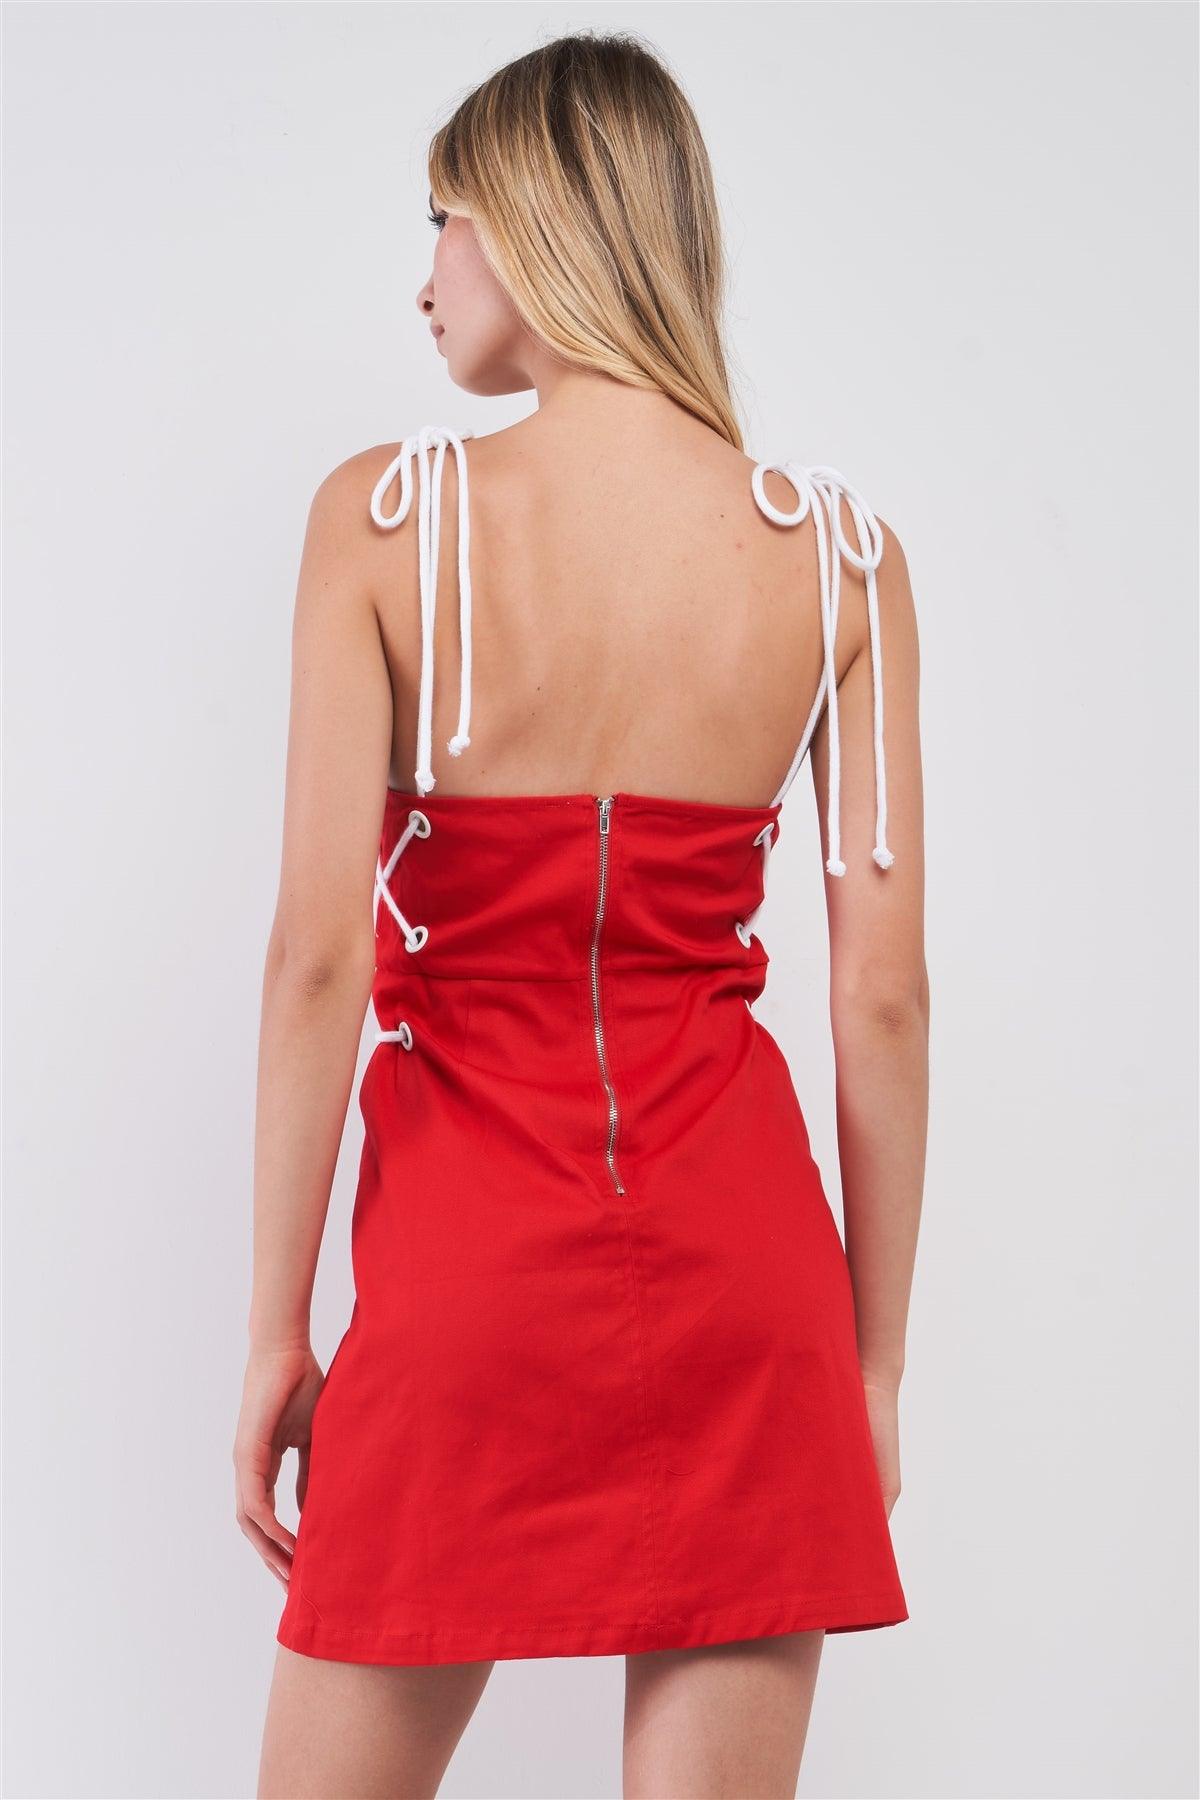 Red & White Lace-Up Straps Sleeveless Square Neck Fitted Mini Dress